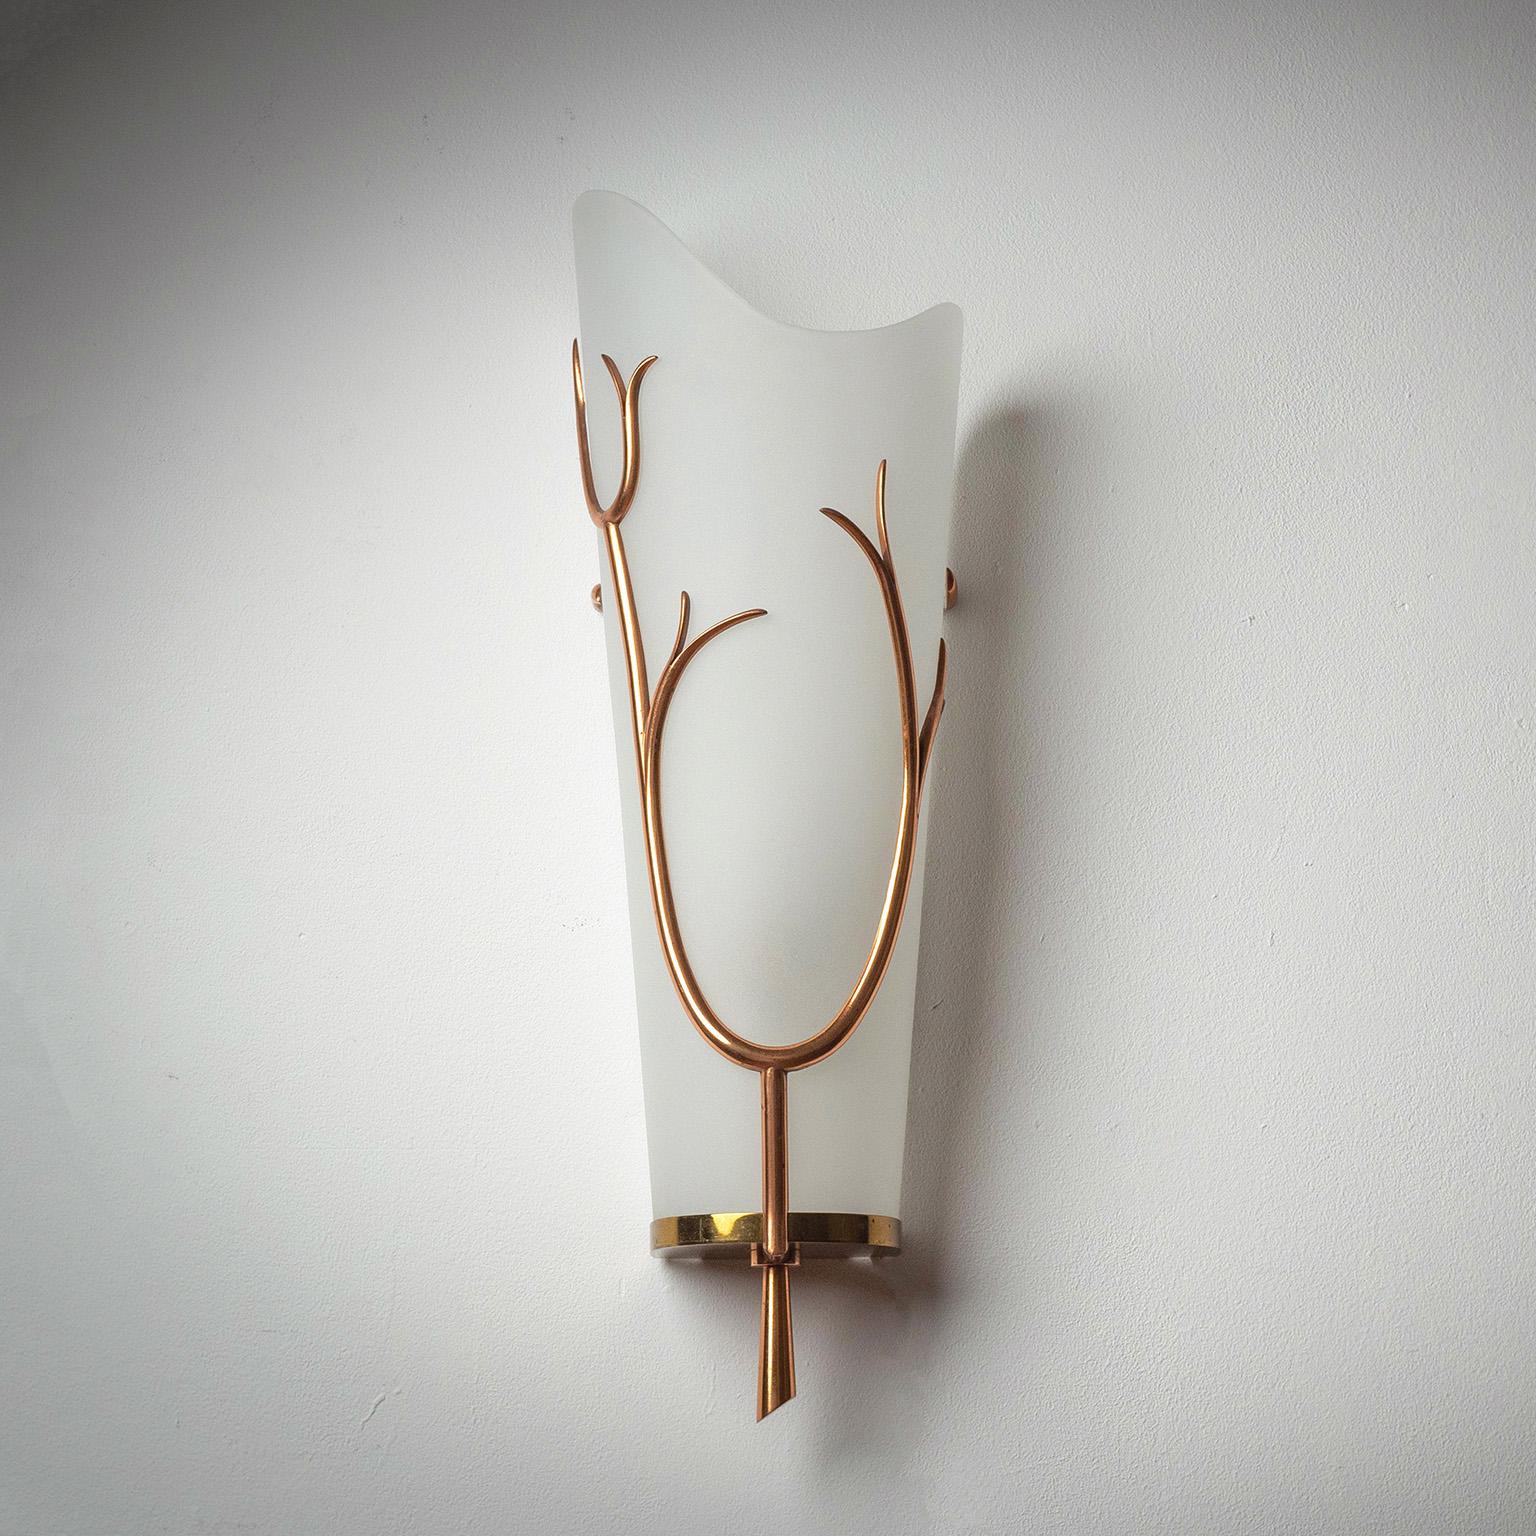 Rare large French Modern wall light from the 1960s, attributed to Arlus. Large conical satin glass diffuser with a „wave“ silhouette on top and a stylized antler or branch decoration in polished copper. Very good original condition with minor patina